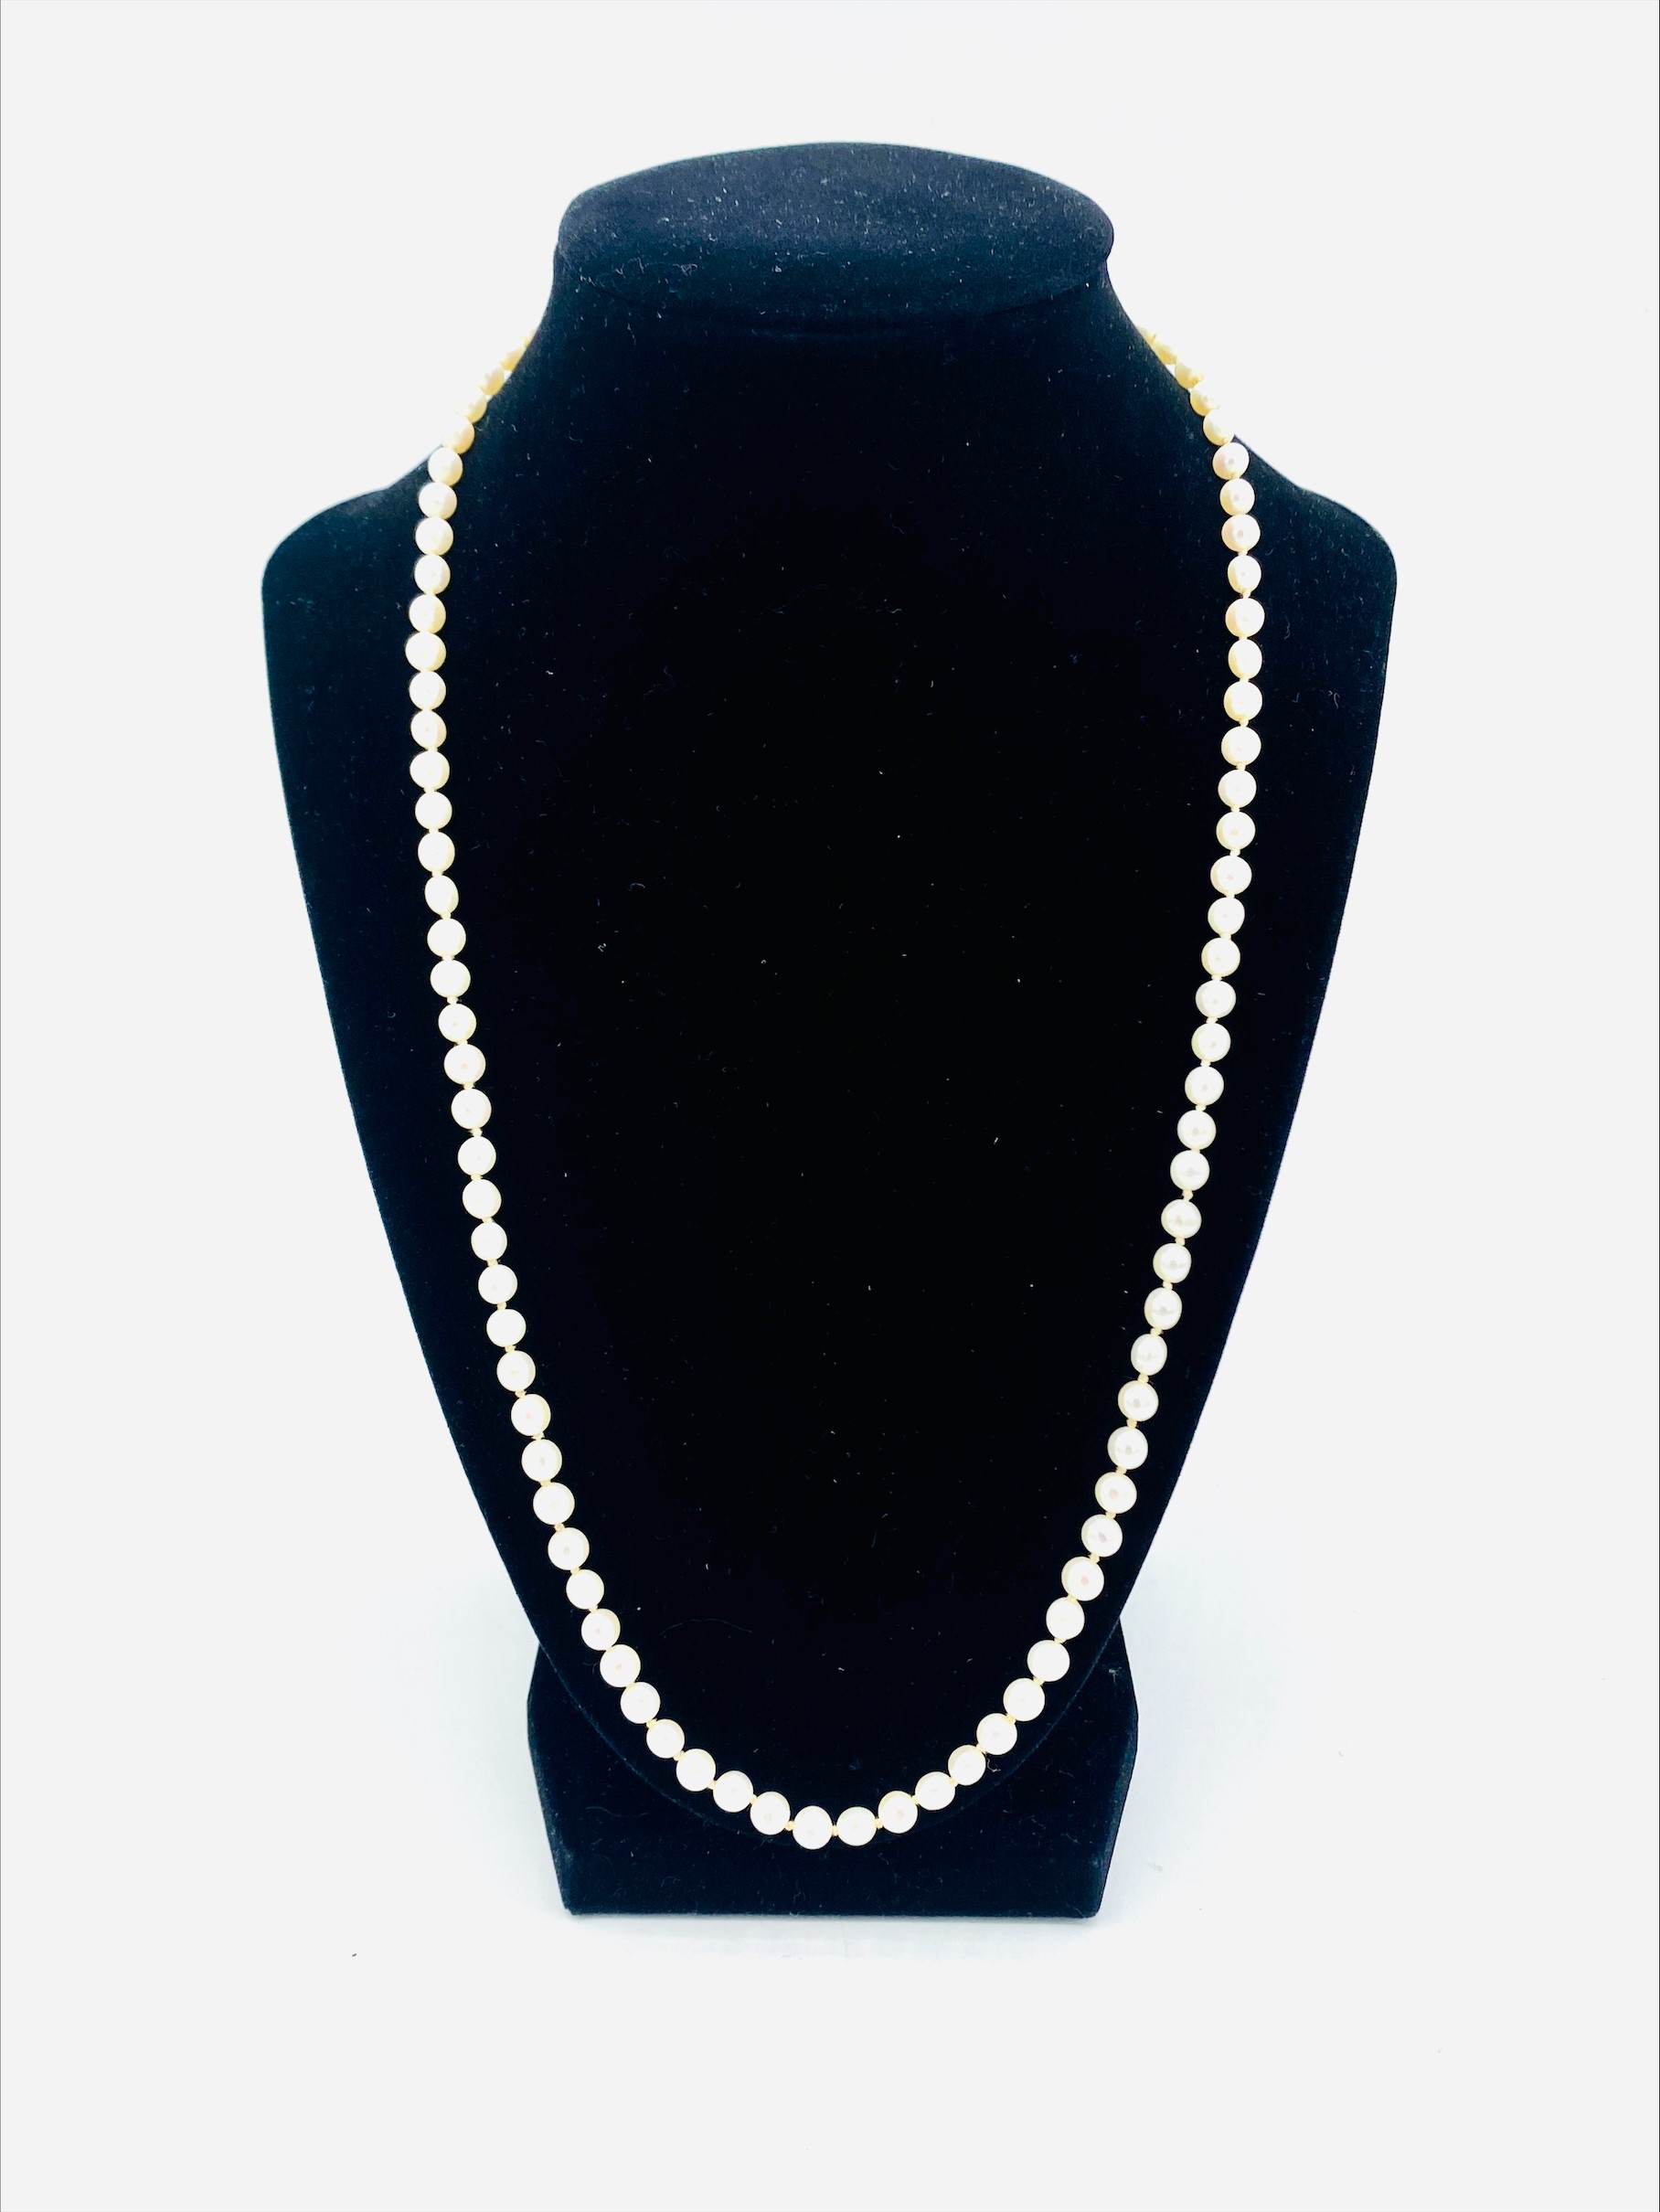 Vintage pearl necklace - Image 5 of 6